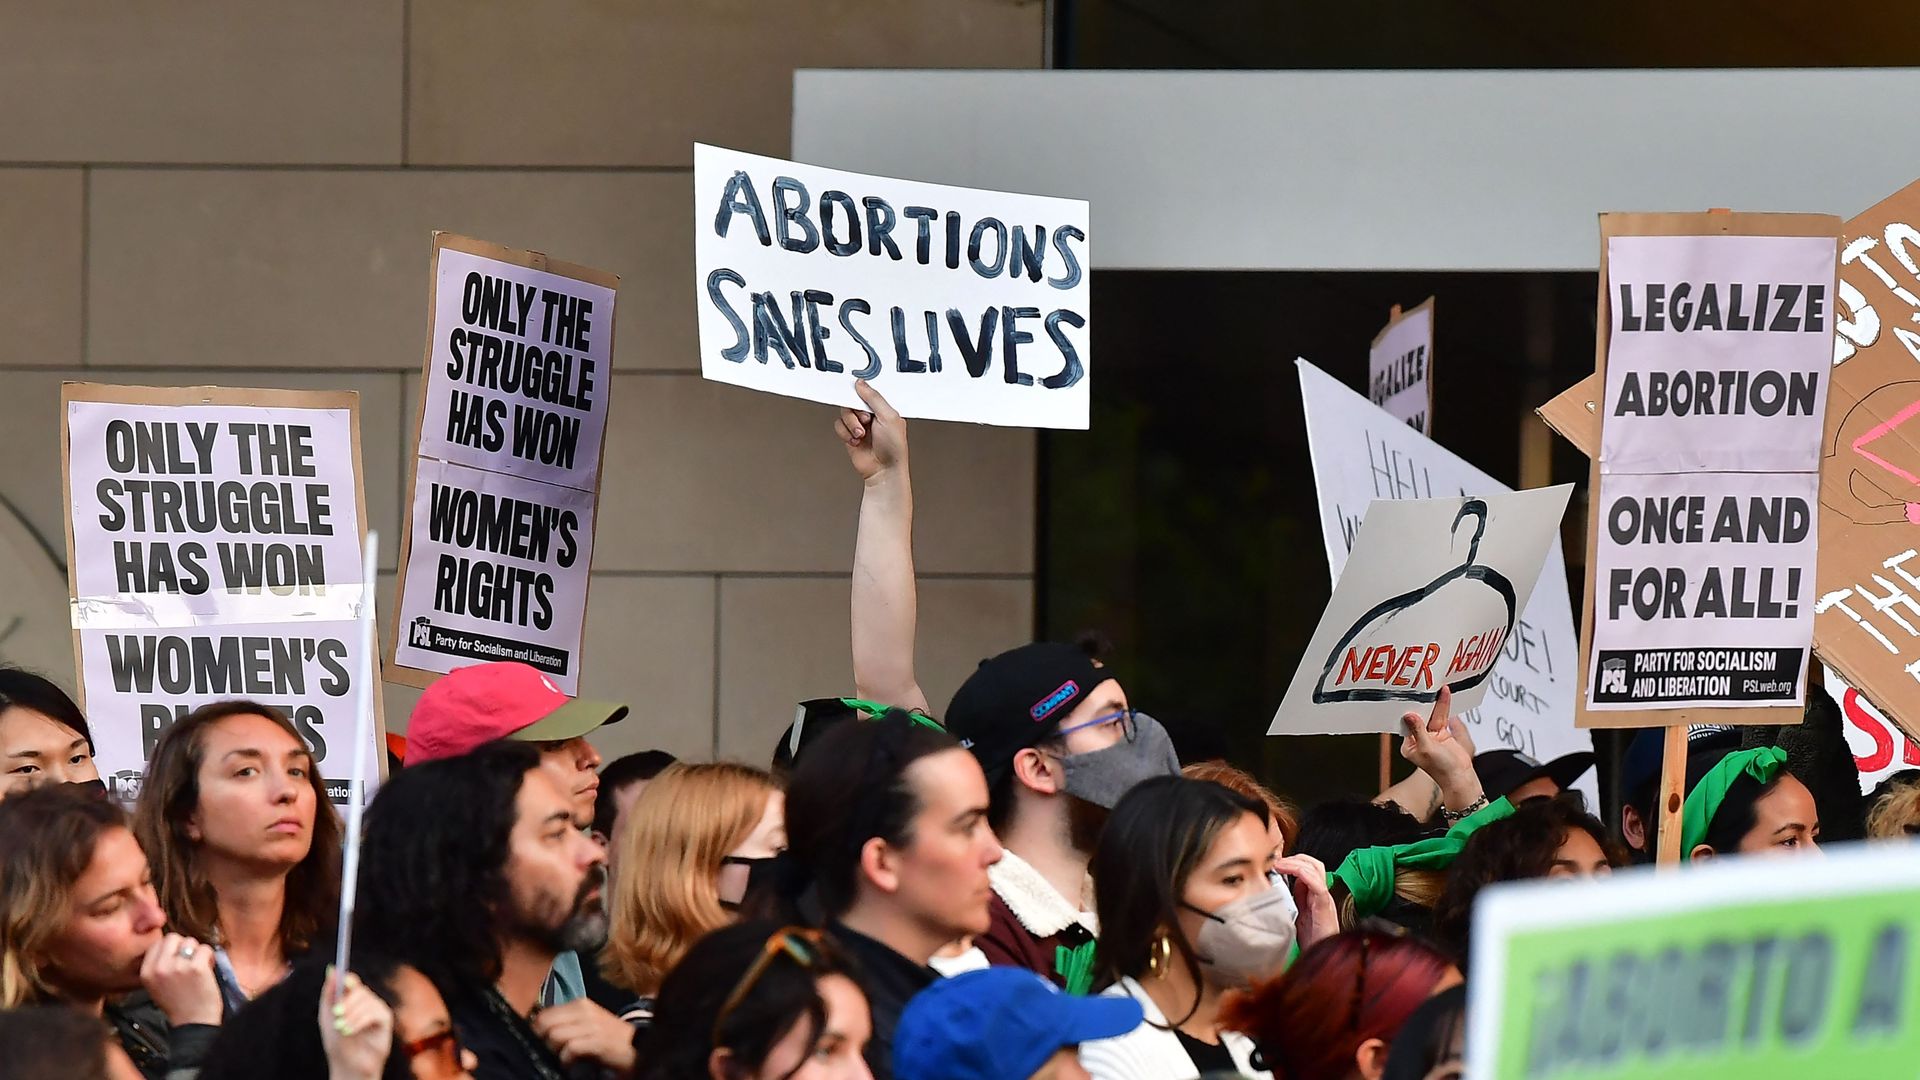 Picture of an abortion rights protest with a person holding a sign that says "abortion saves lives"